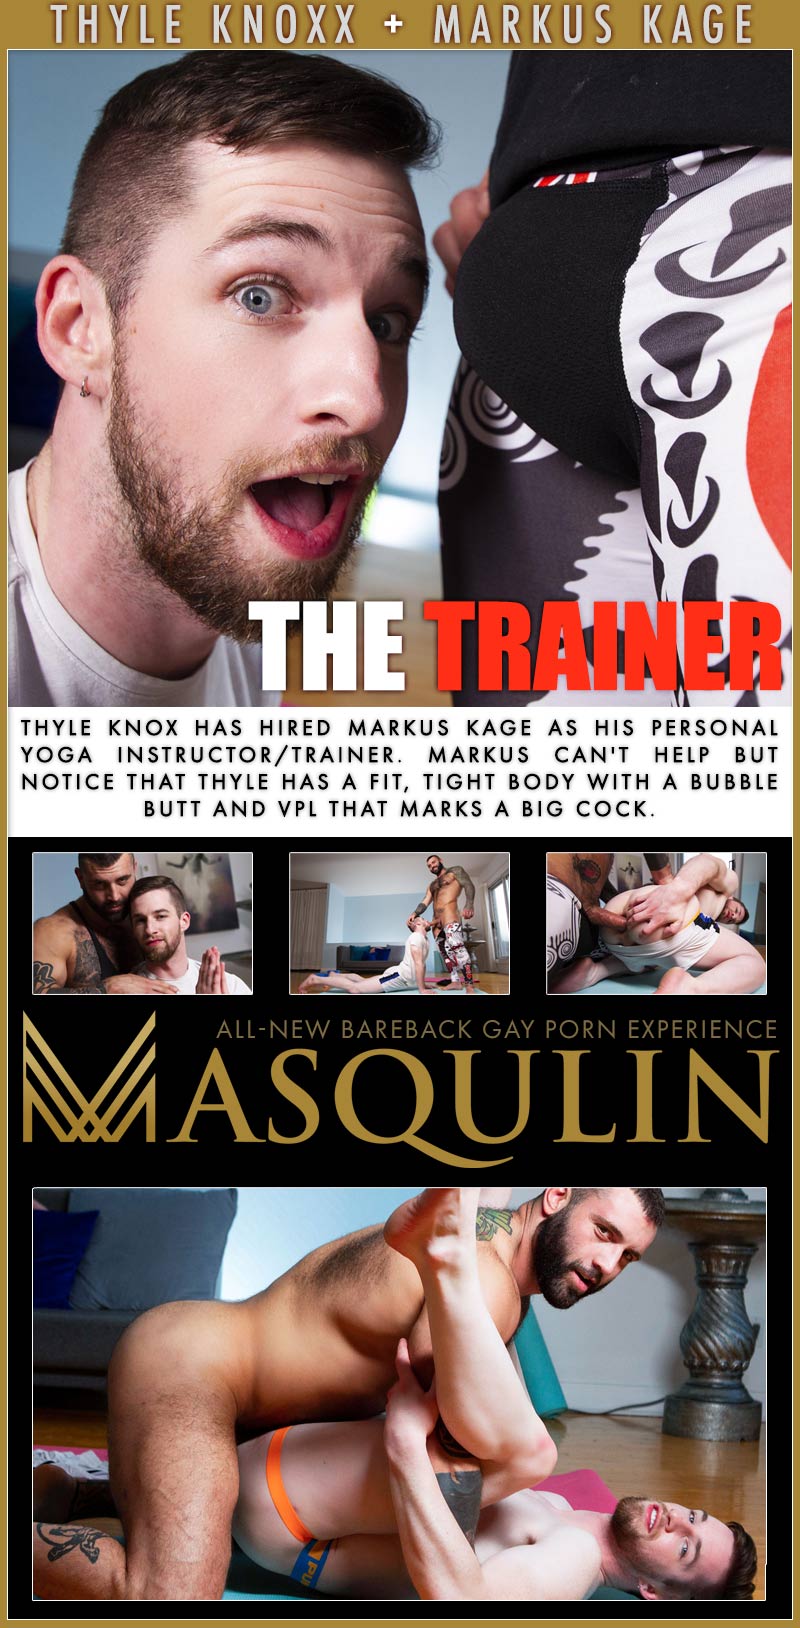 The Trainer (Markus Kage & Thyle Knoxx)